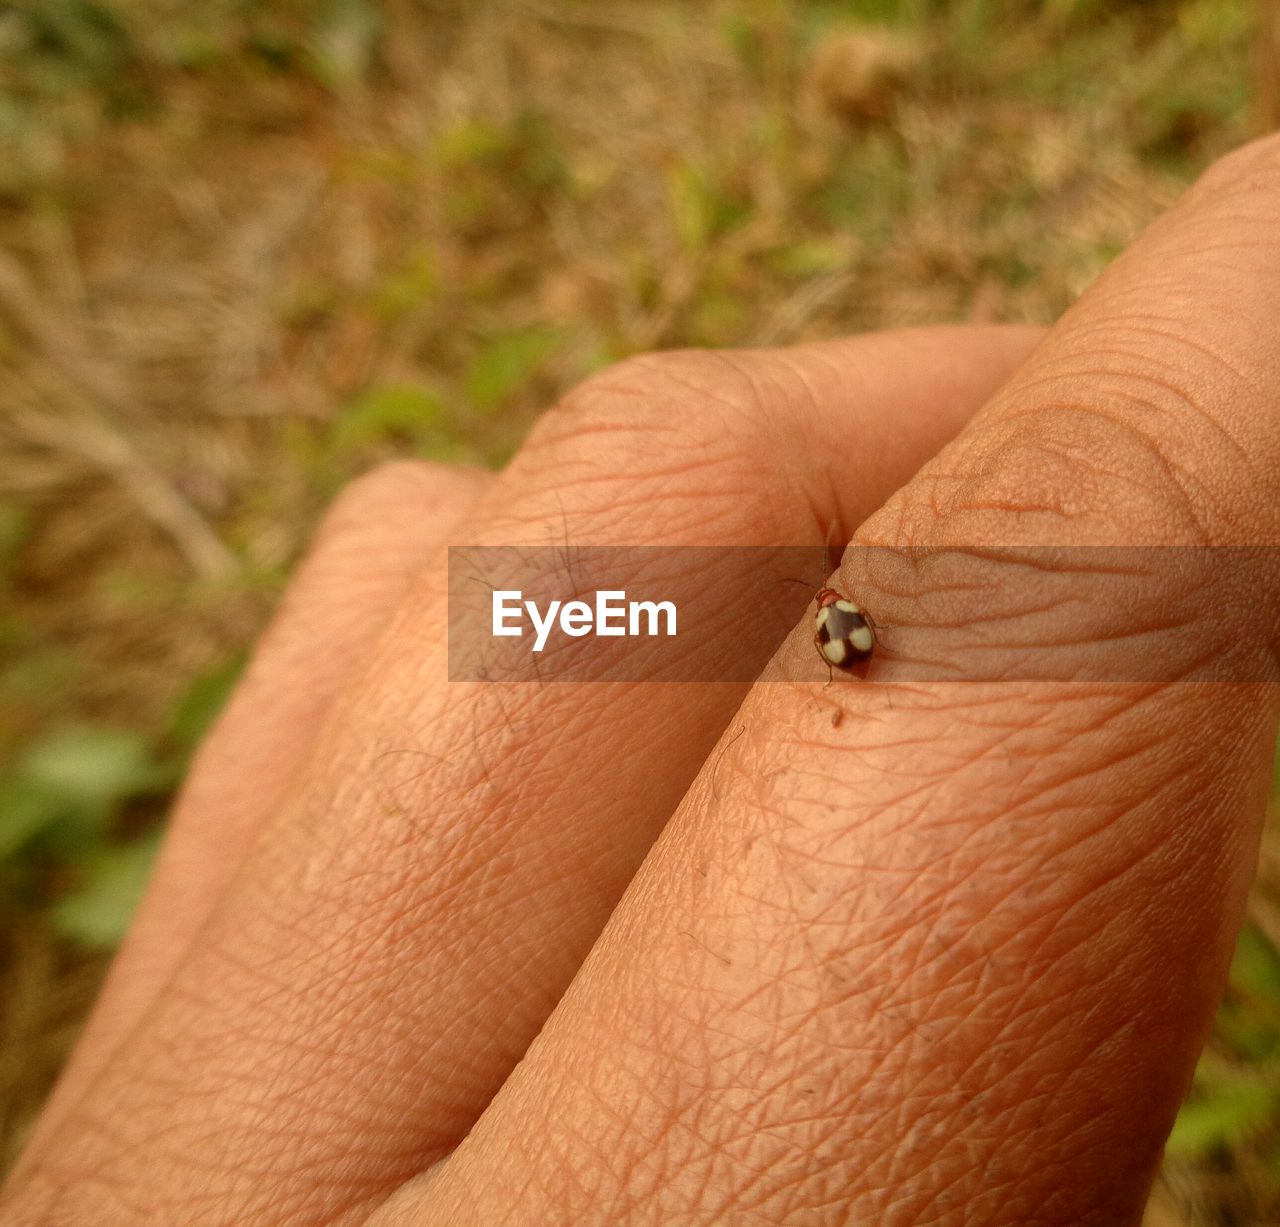 CLOSE-UP OF INSECT ON FINGER